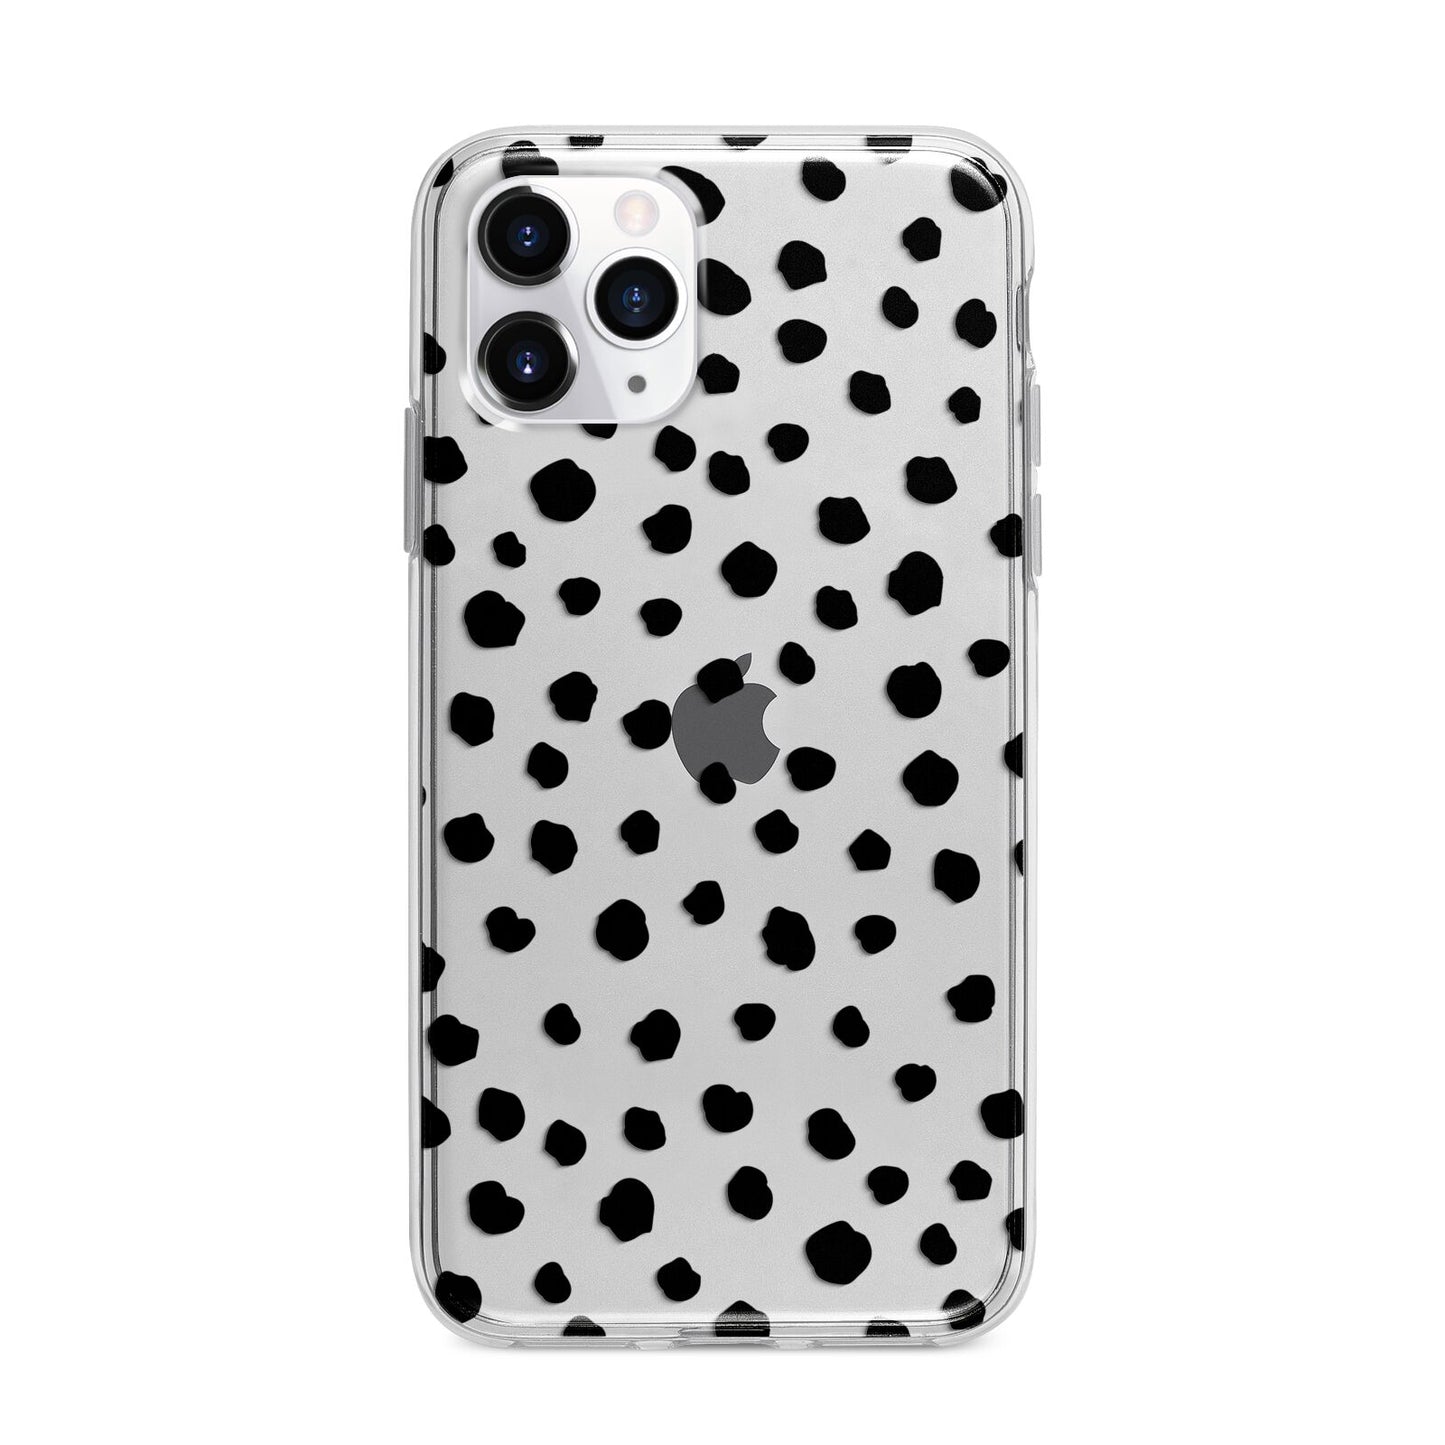 Polka Dot Apple iPhone 11 Pro Max in Silver with Bumper Case